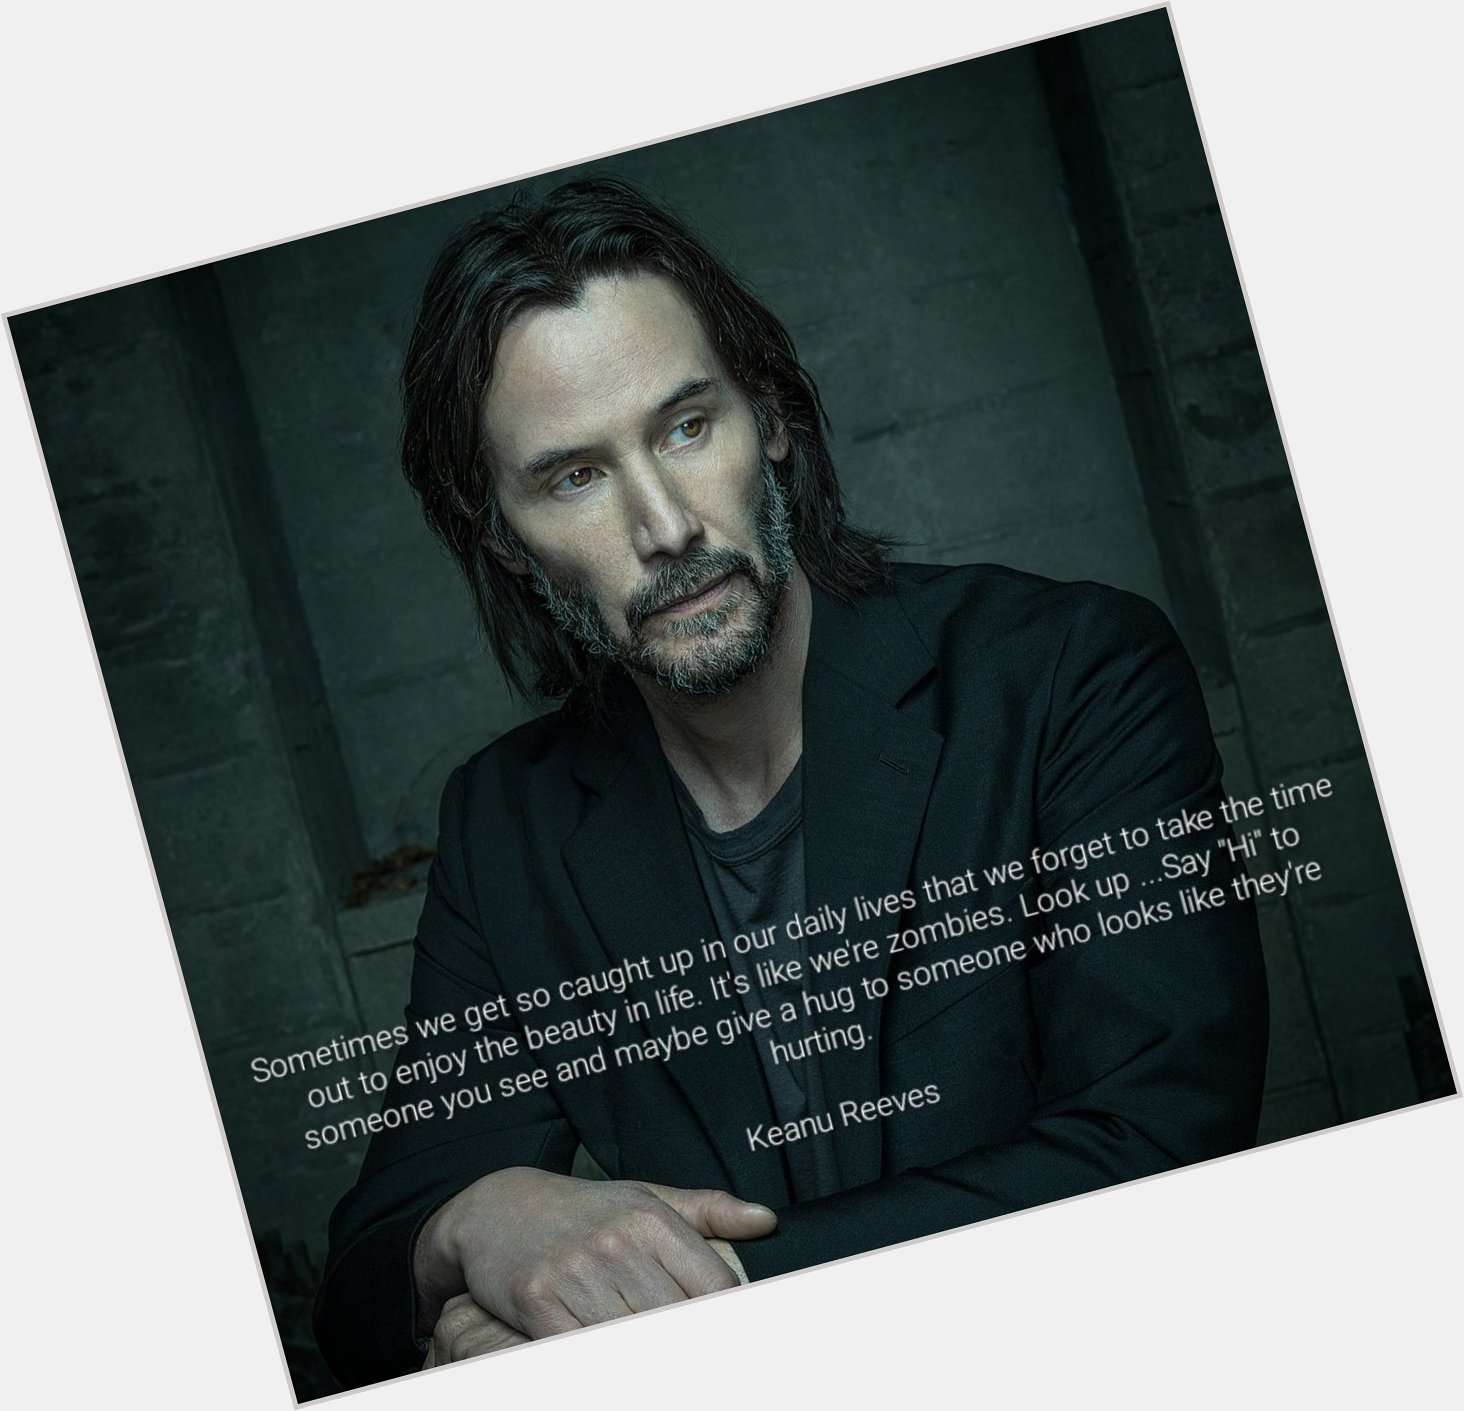 \"Sometimes we get so caught up in our daily lives ...\"  Keanu Reeves 

Happy Birthday 